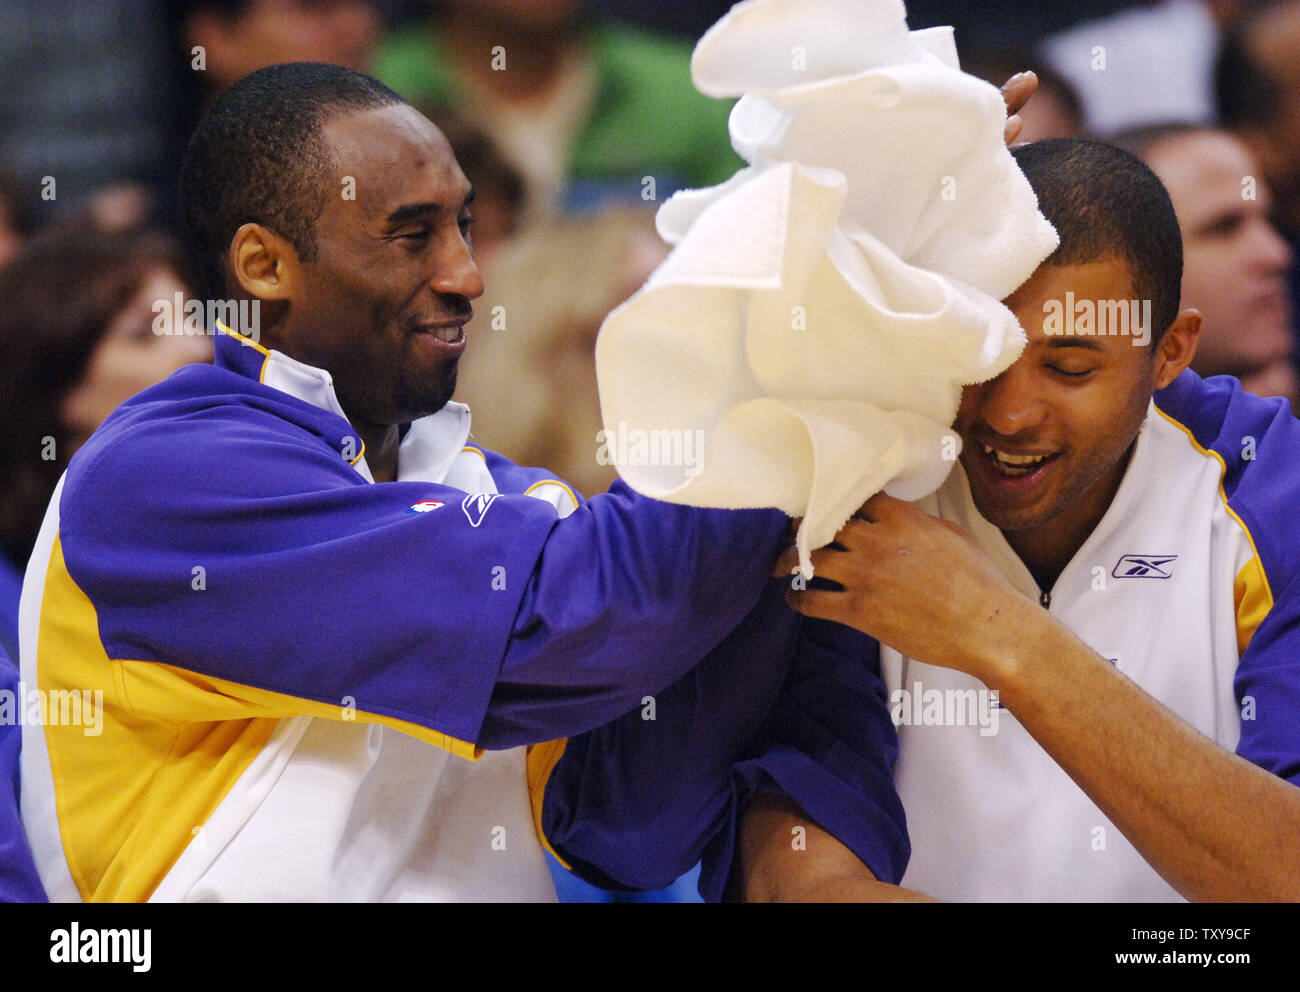 Los Angeles Lakers' guard Kobe Bryant (L) gets playful with teammate Brian  Cook on the bench in the waning moments of their NBA basketball game  against the Houston Rockets at Staples Center